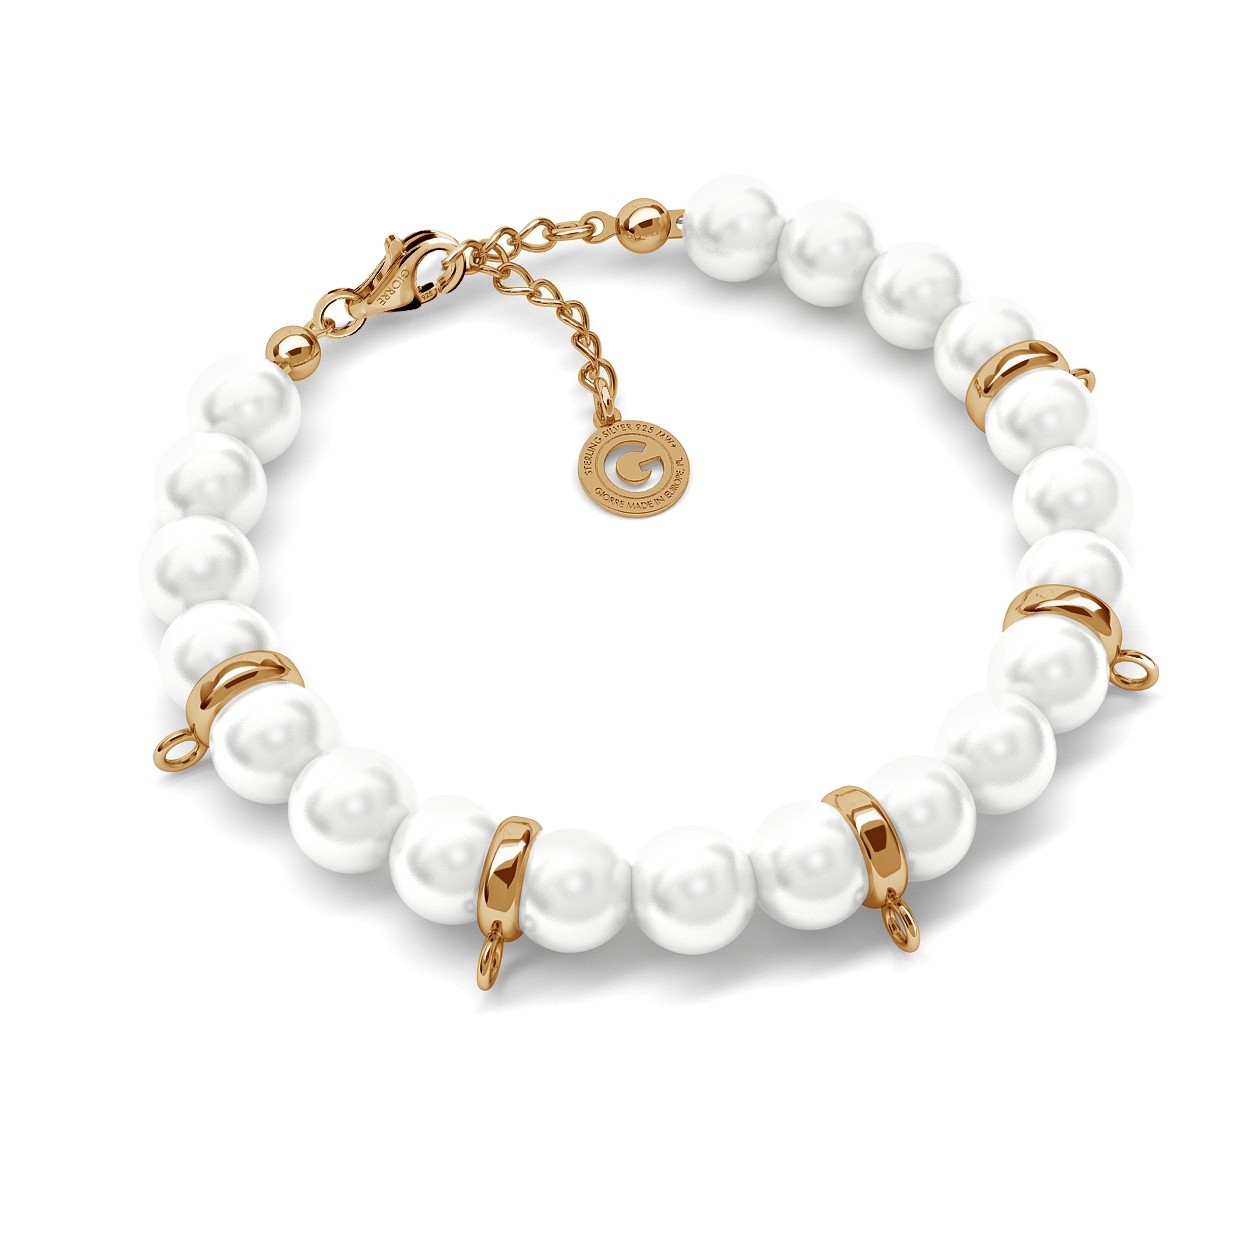 BRACELET WITH PEARLS, SILVER 925, RHODIUM OR GOLD PLATED